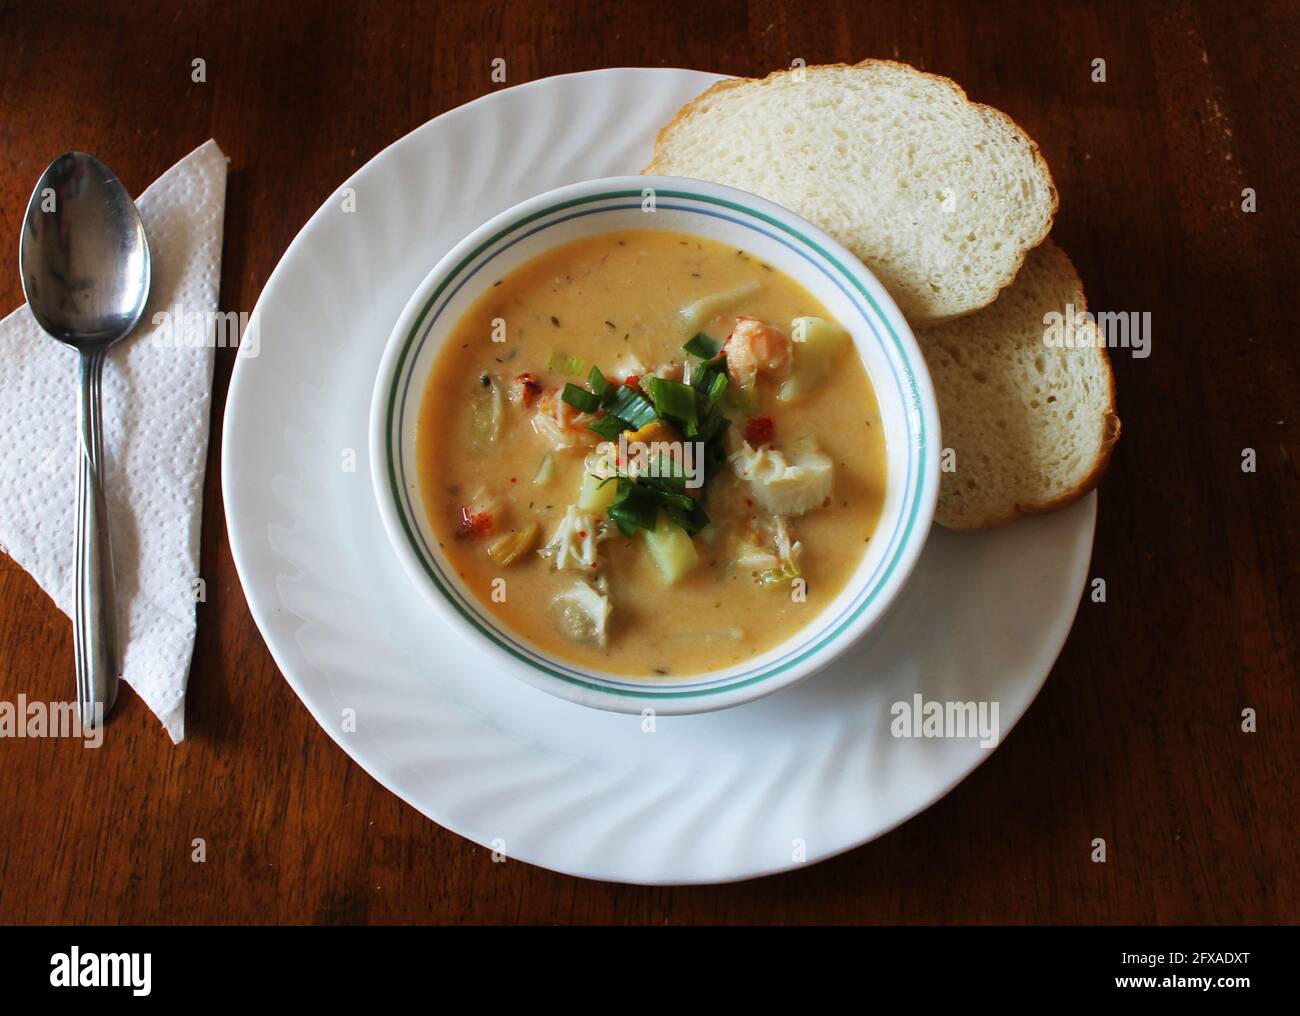 A bowl of homemade seafood chowder with homemade bread. White bowl on a white plate, serviette and spoon. Stock Photo